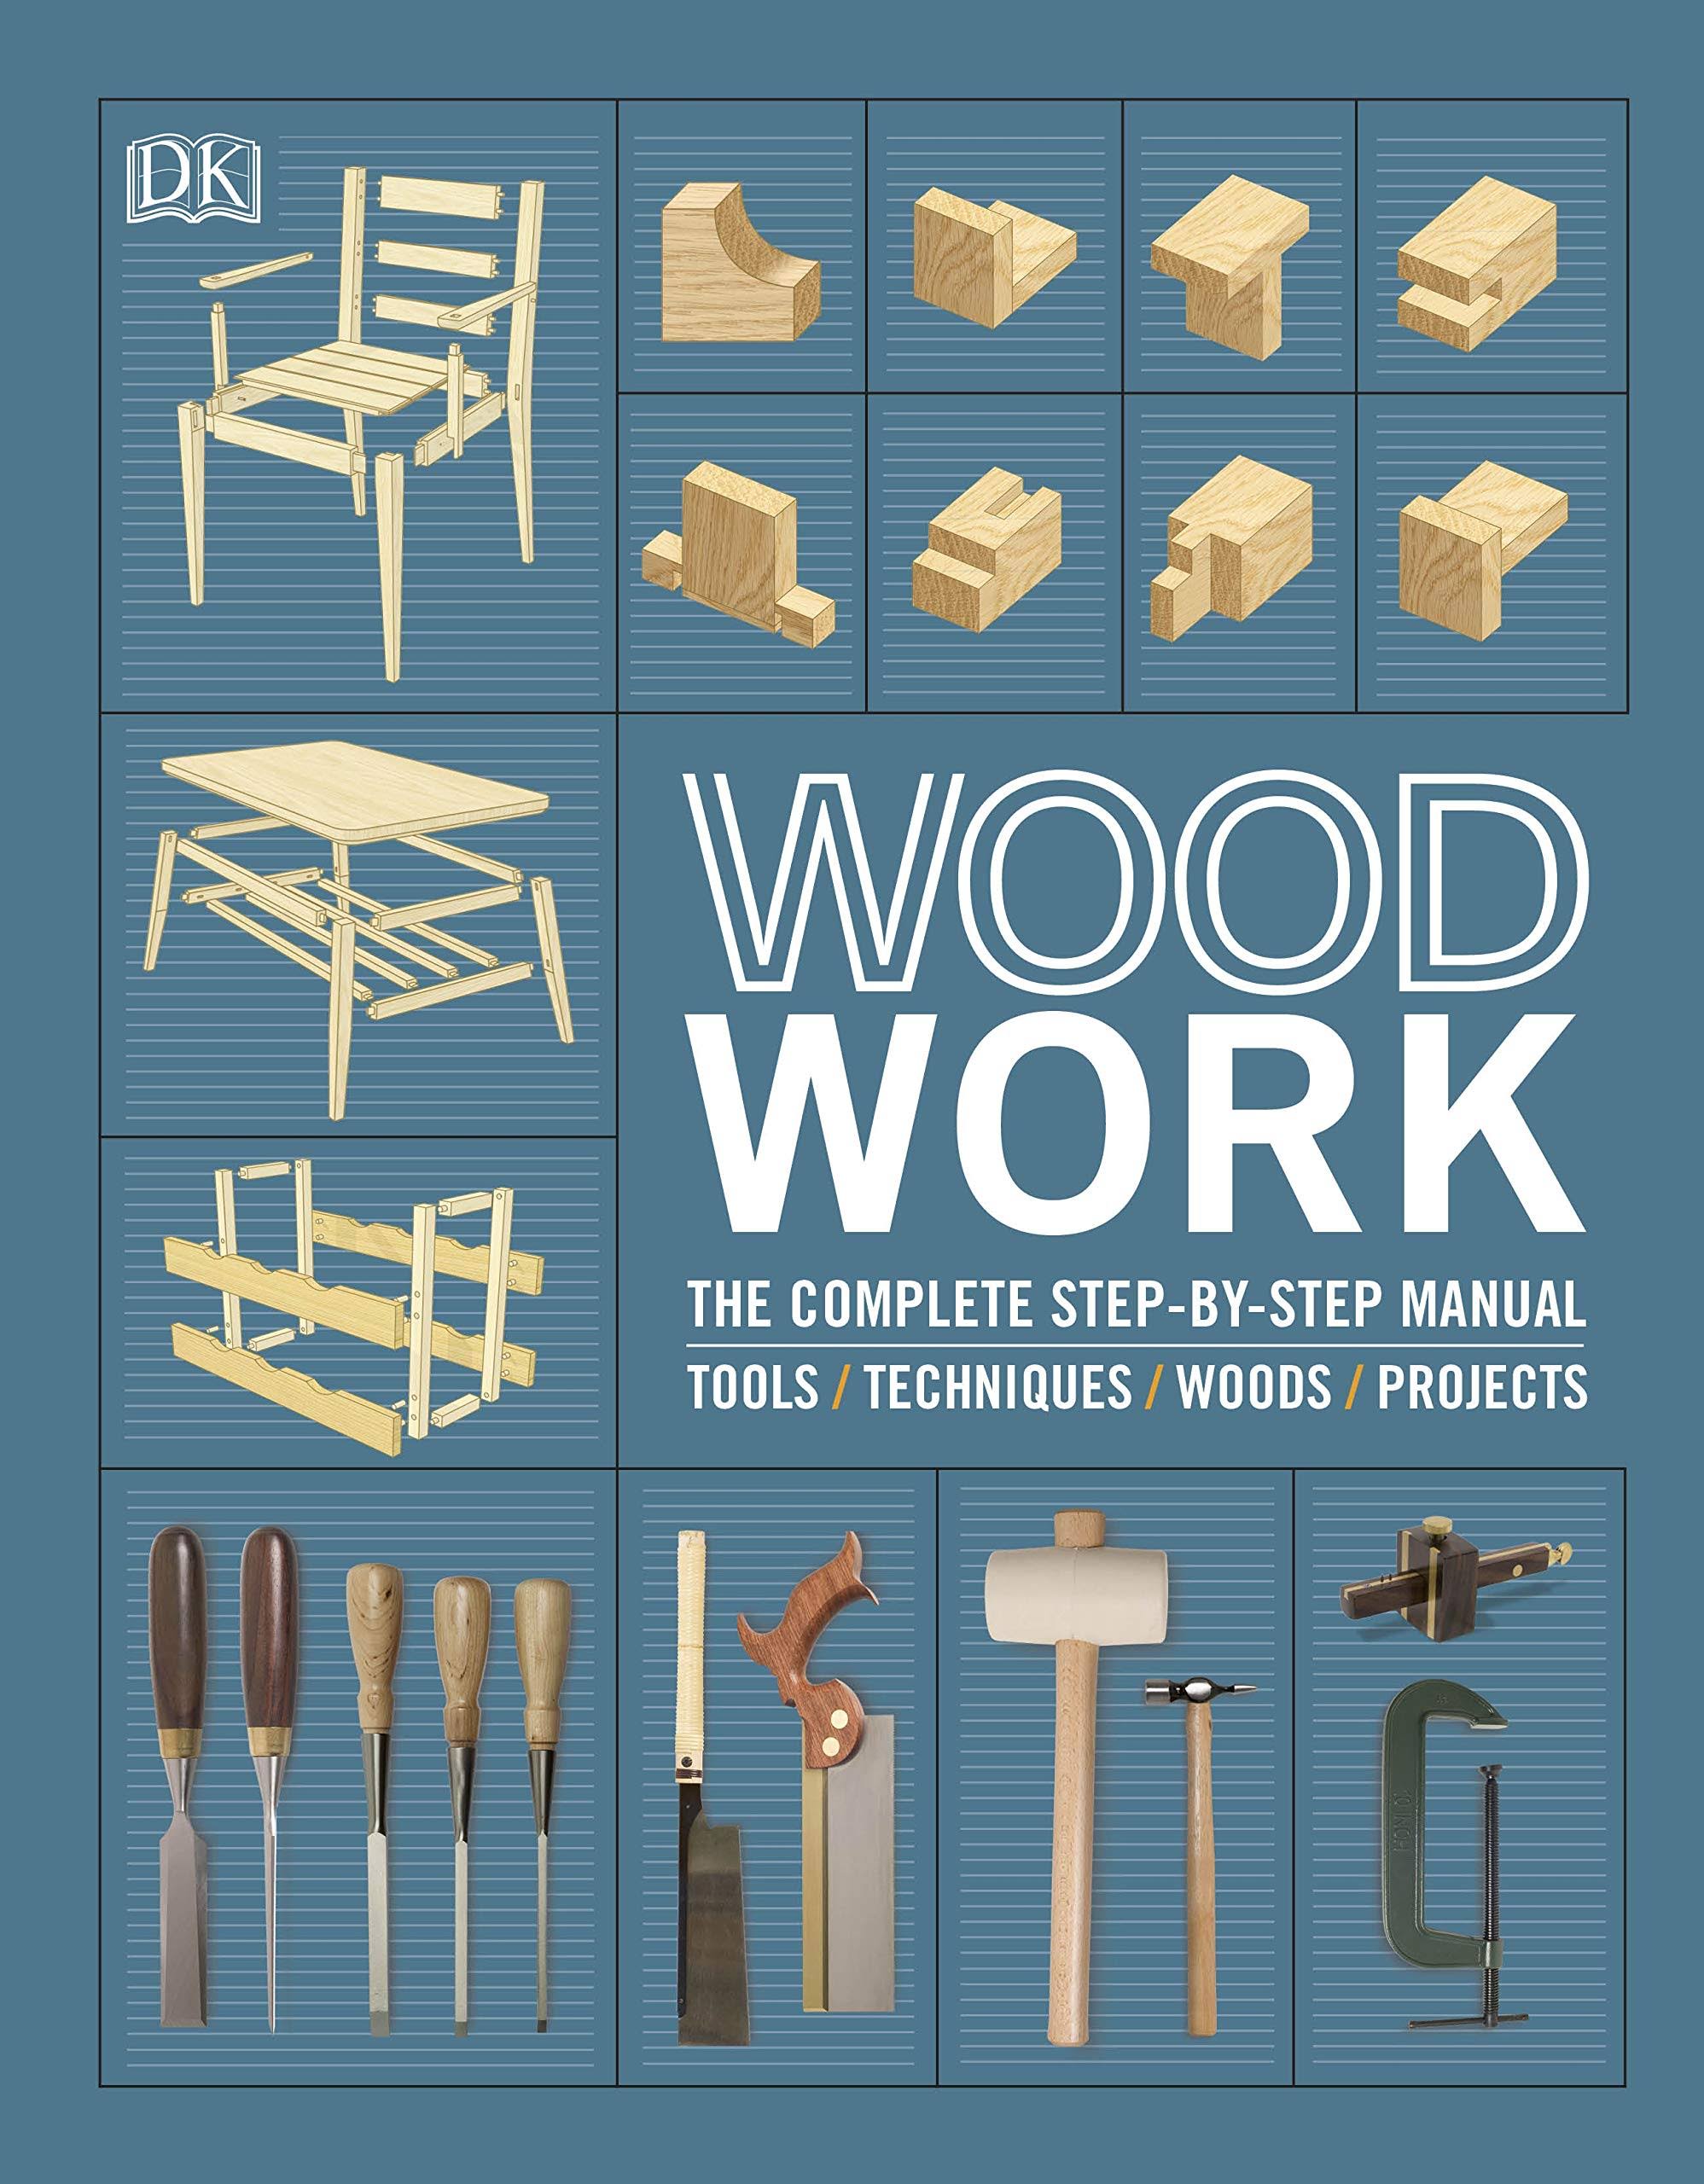 Woodwork: The Complete Step-by-step Manual [Book]